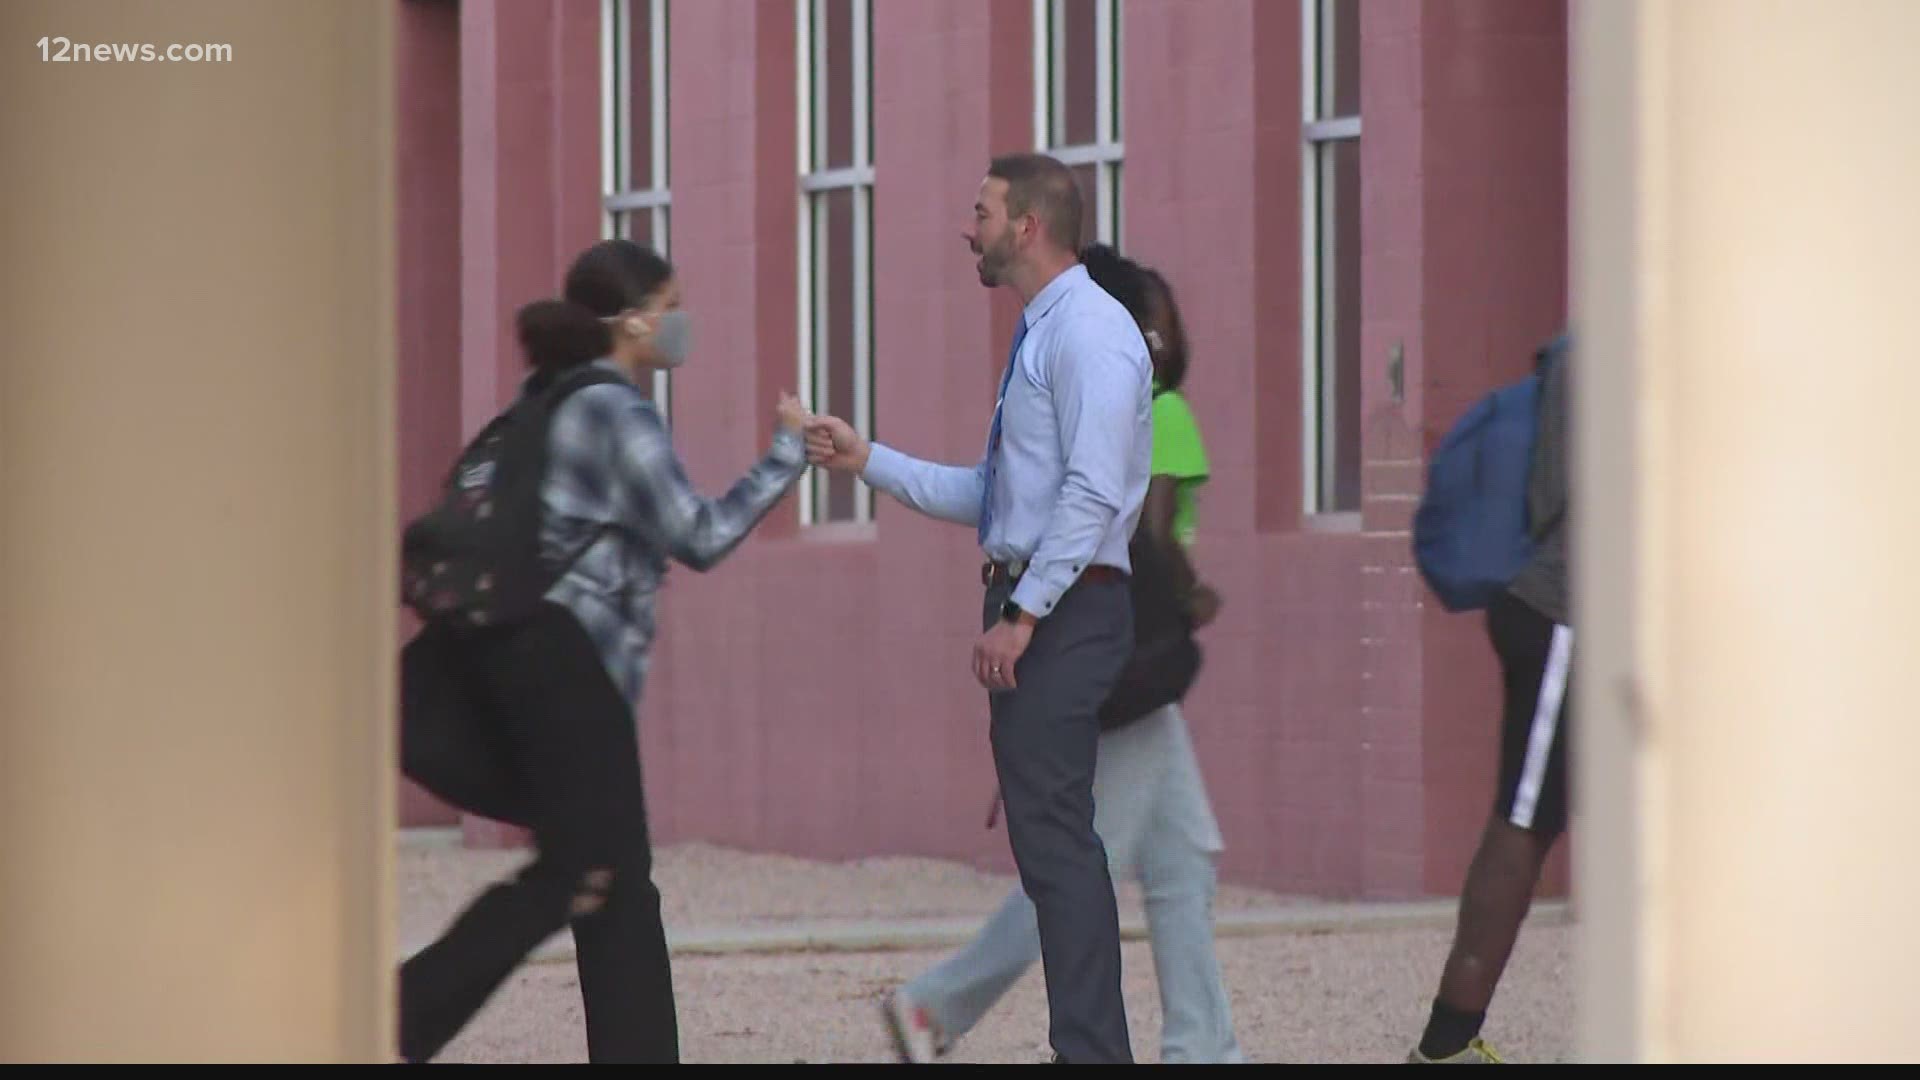 It's hard to believe, but for some students, it's back to school time. San Tan Valley students were welcomed back on Wednesday by Pinal County Sheriff Mark Lamb.